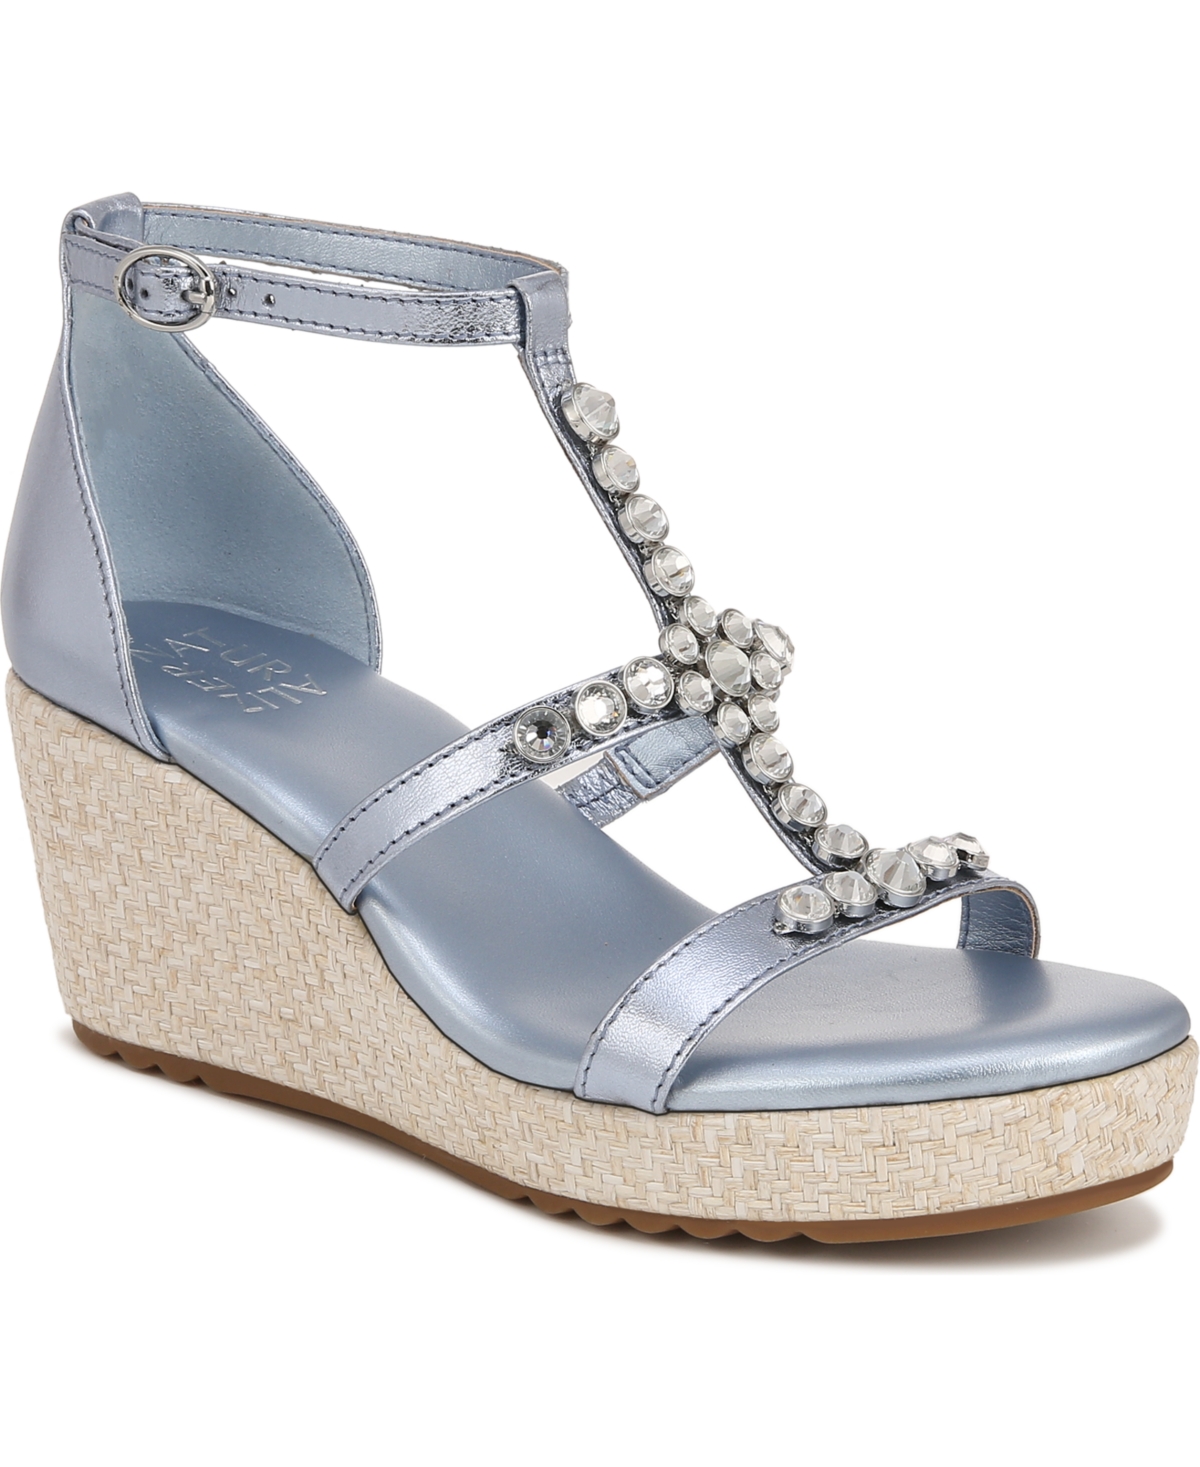 Serena Wedge Sandals - Light Blue Metallic Faux Leather